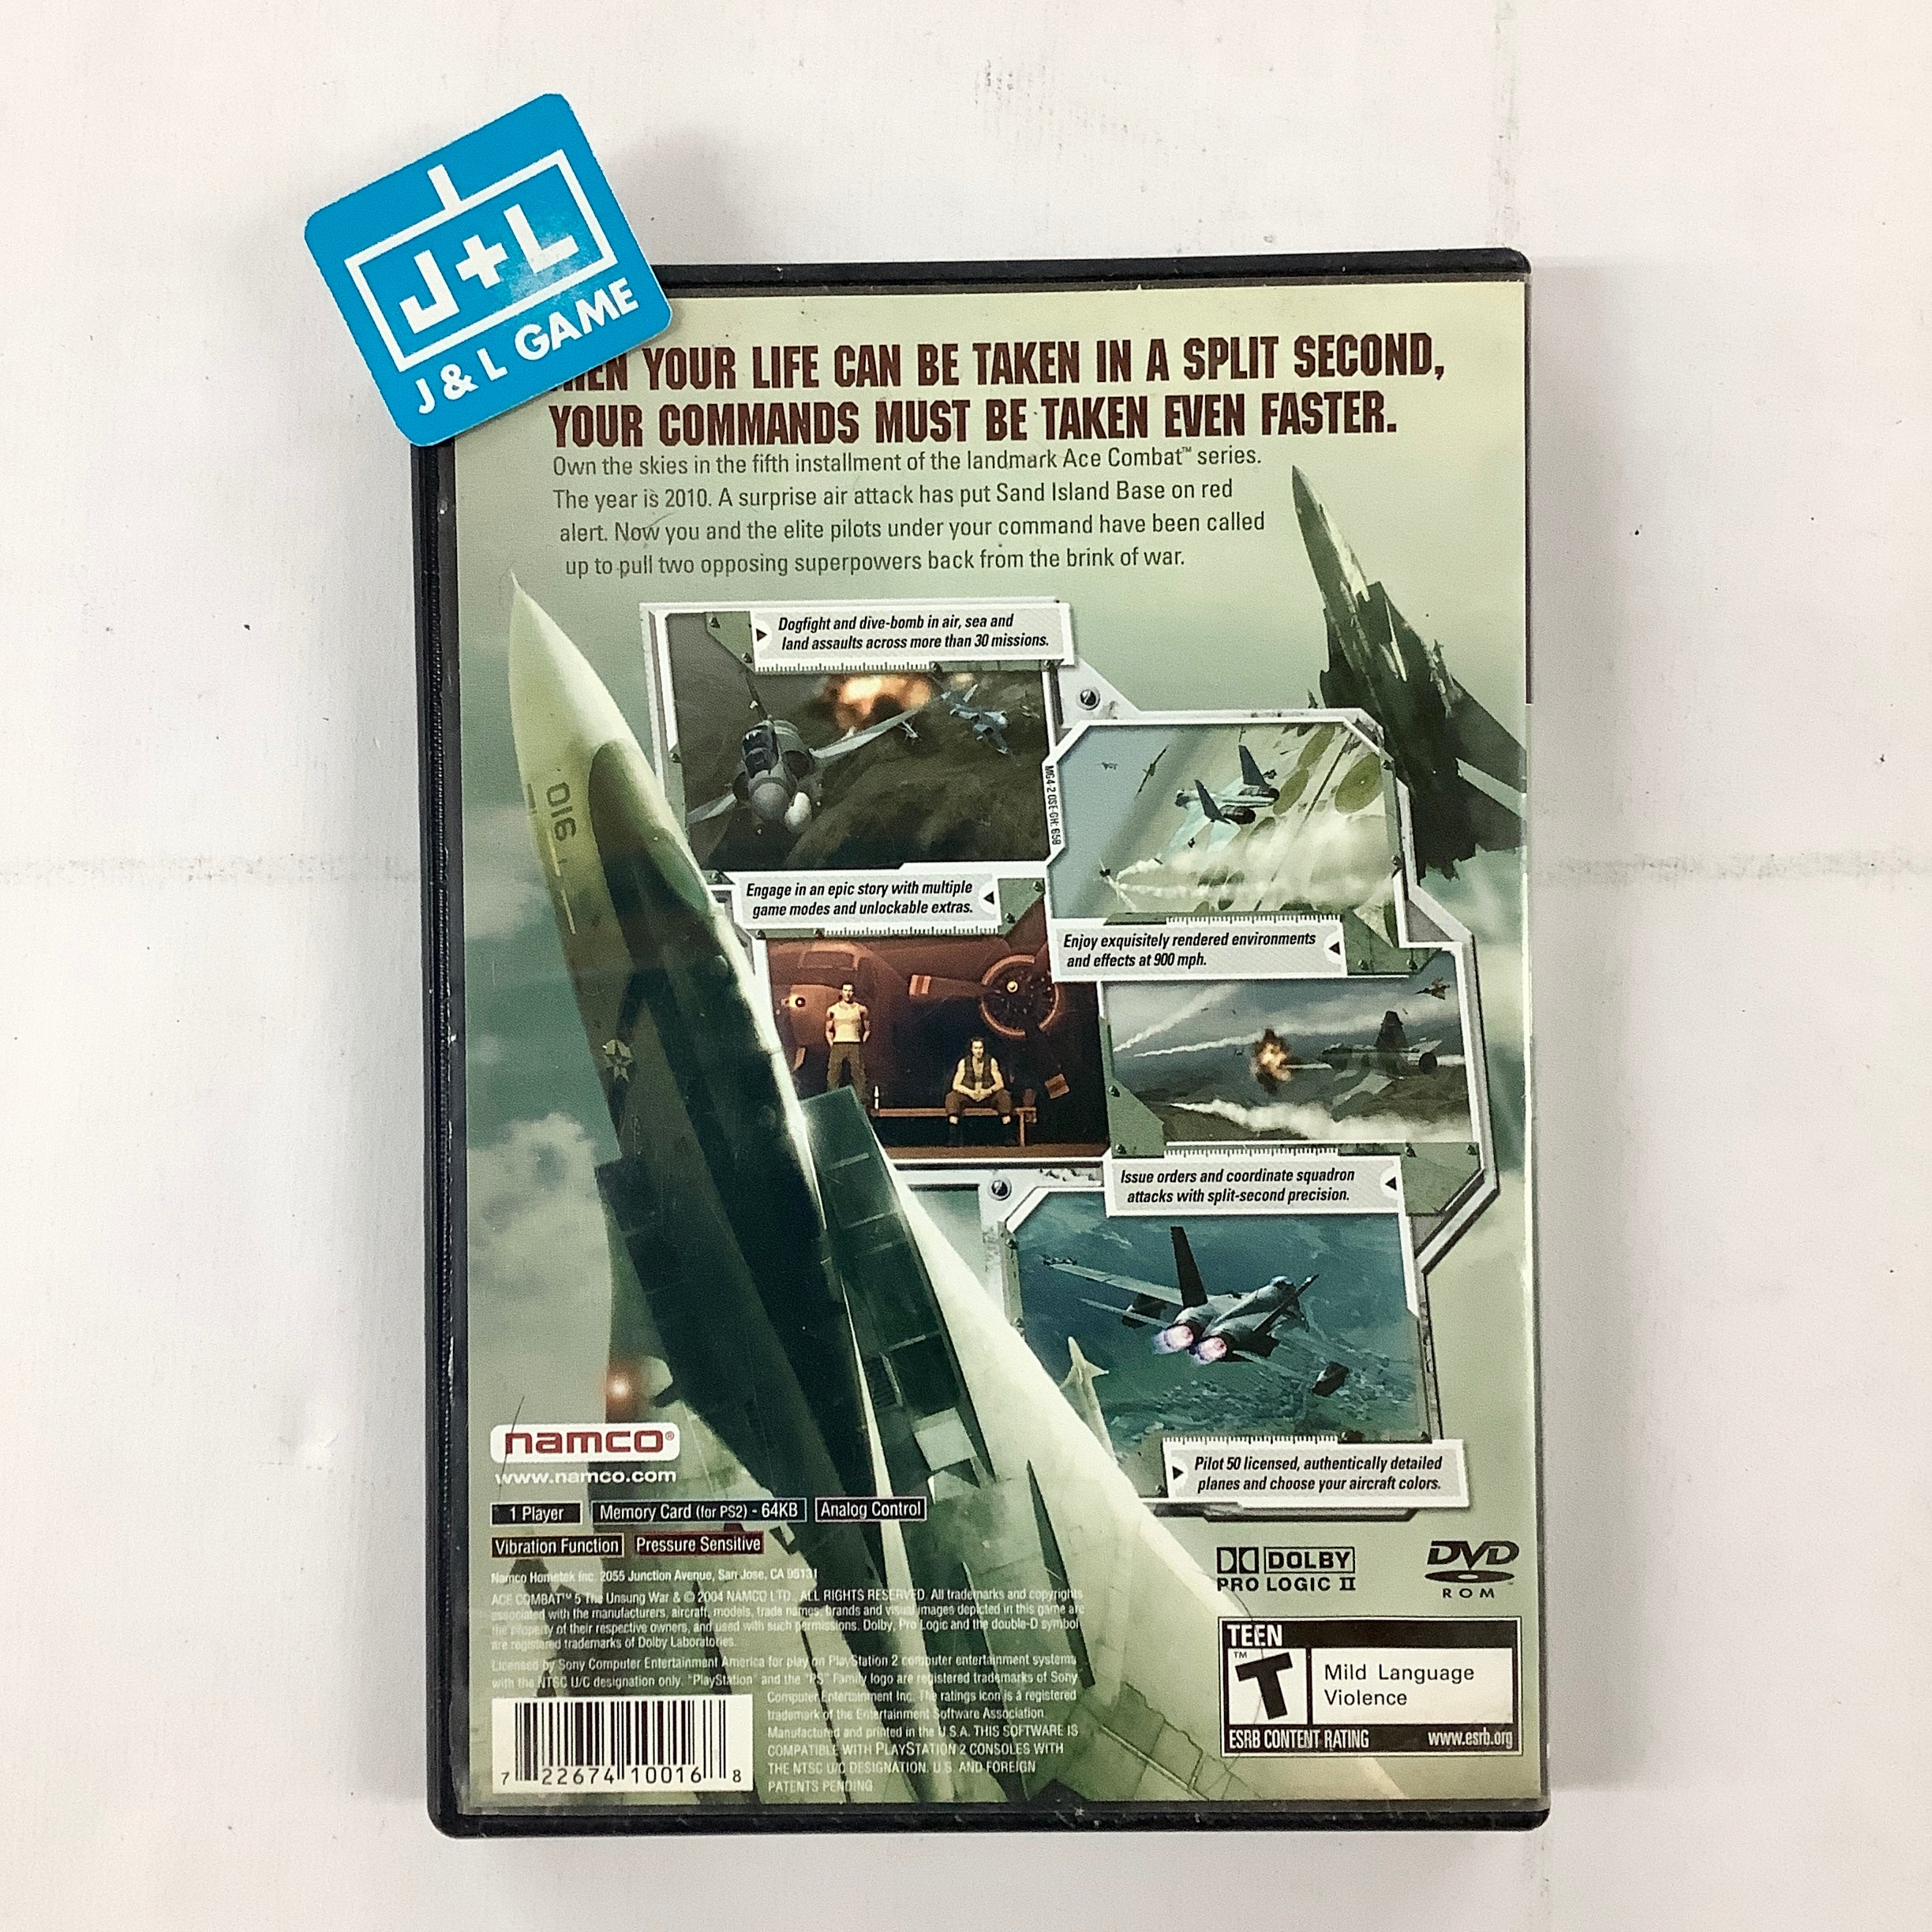 Ace Combat 5: The Unsung War - (PS2) PlayStation 2 [Pre-Owned] Video Games Namco   